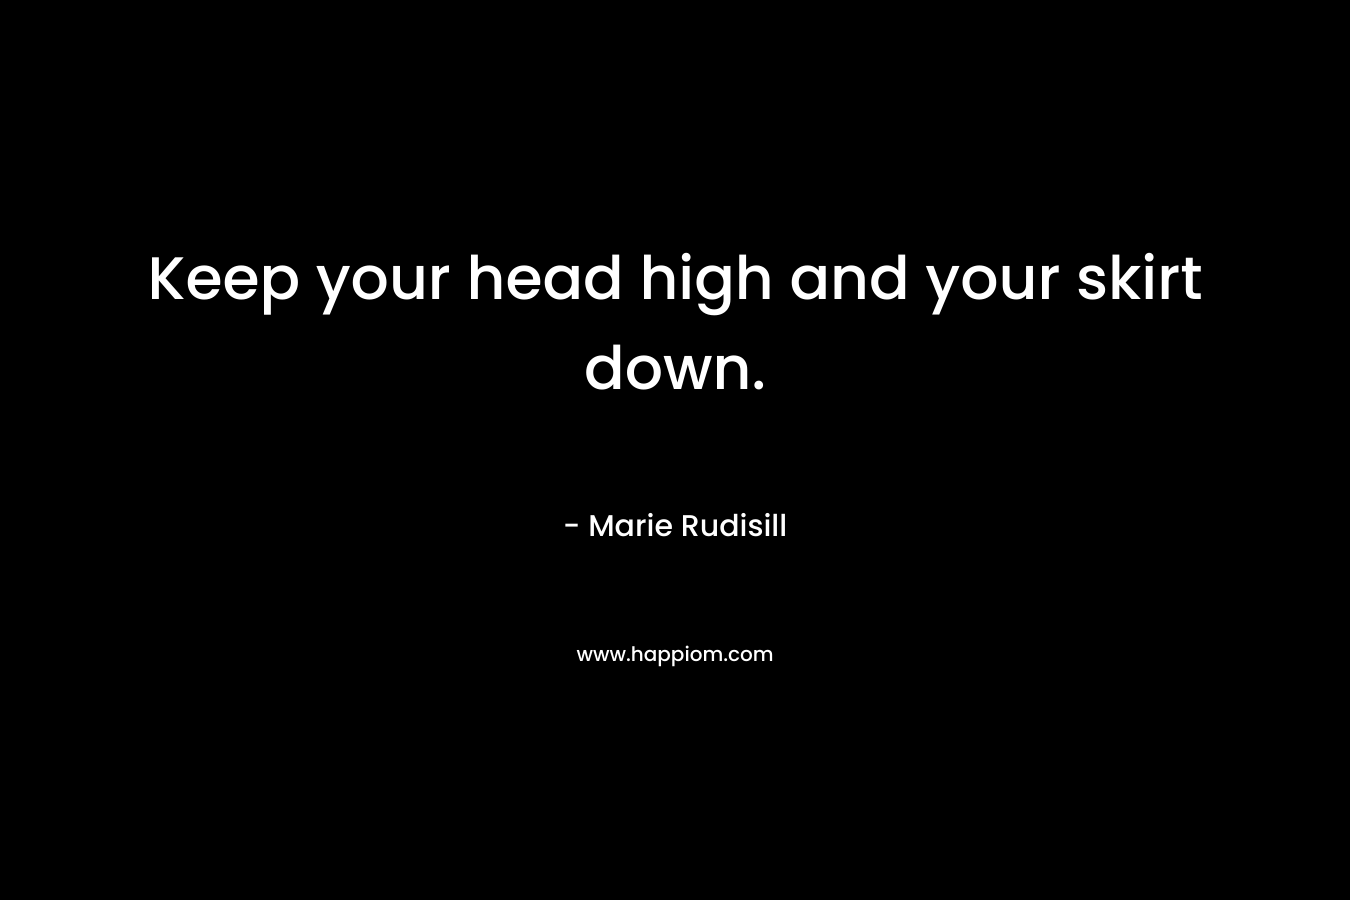 Keep your head high and your skirt down.